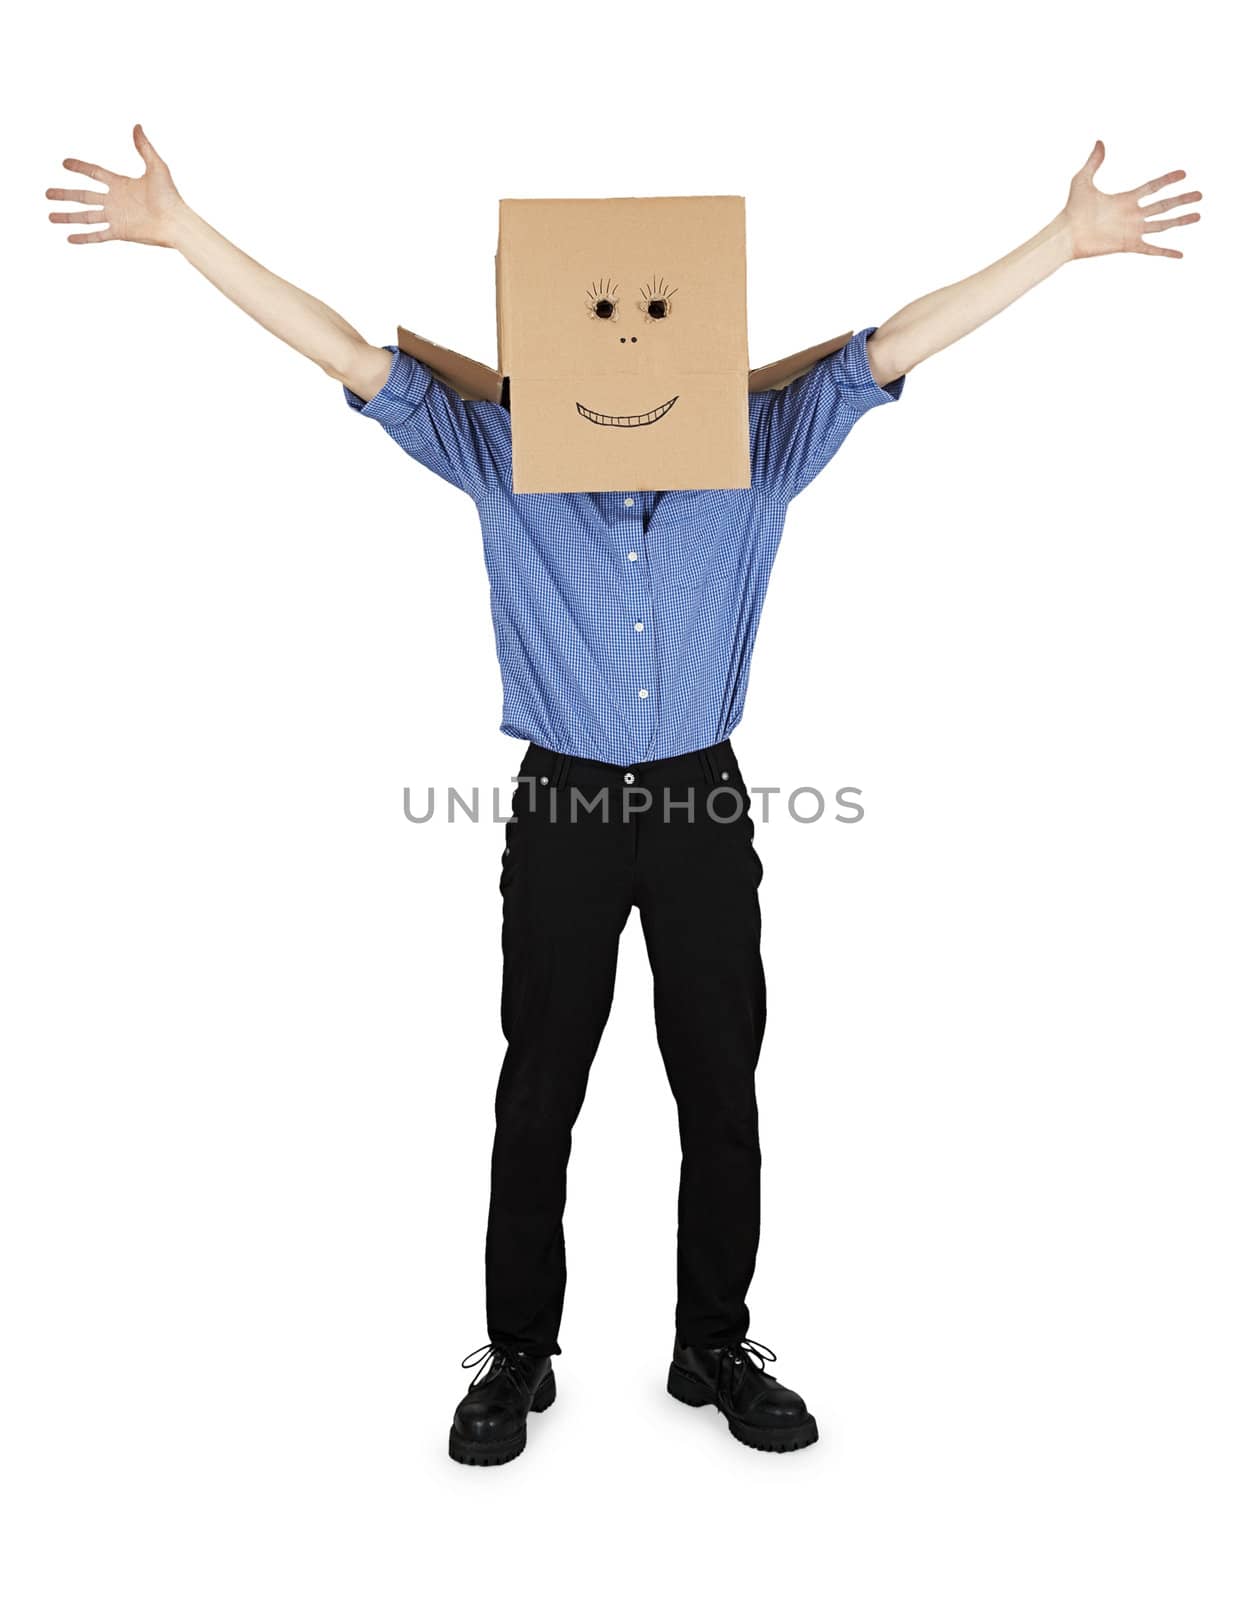 Funny man with box on head rejoices by pzaxe